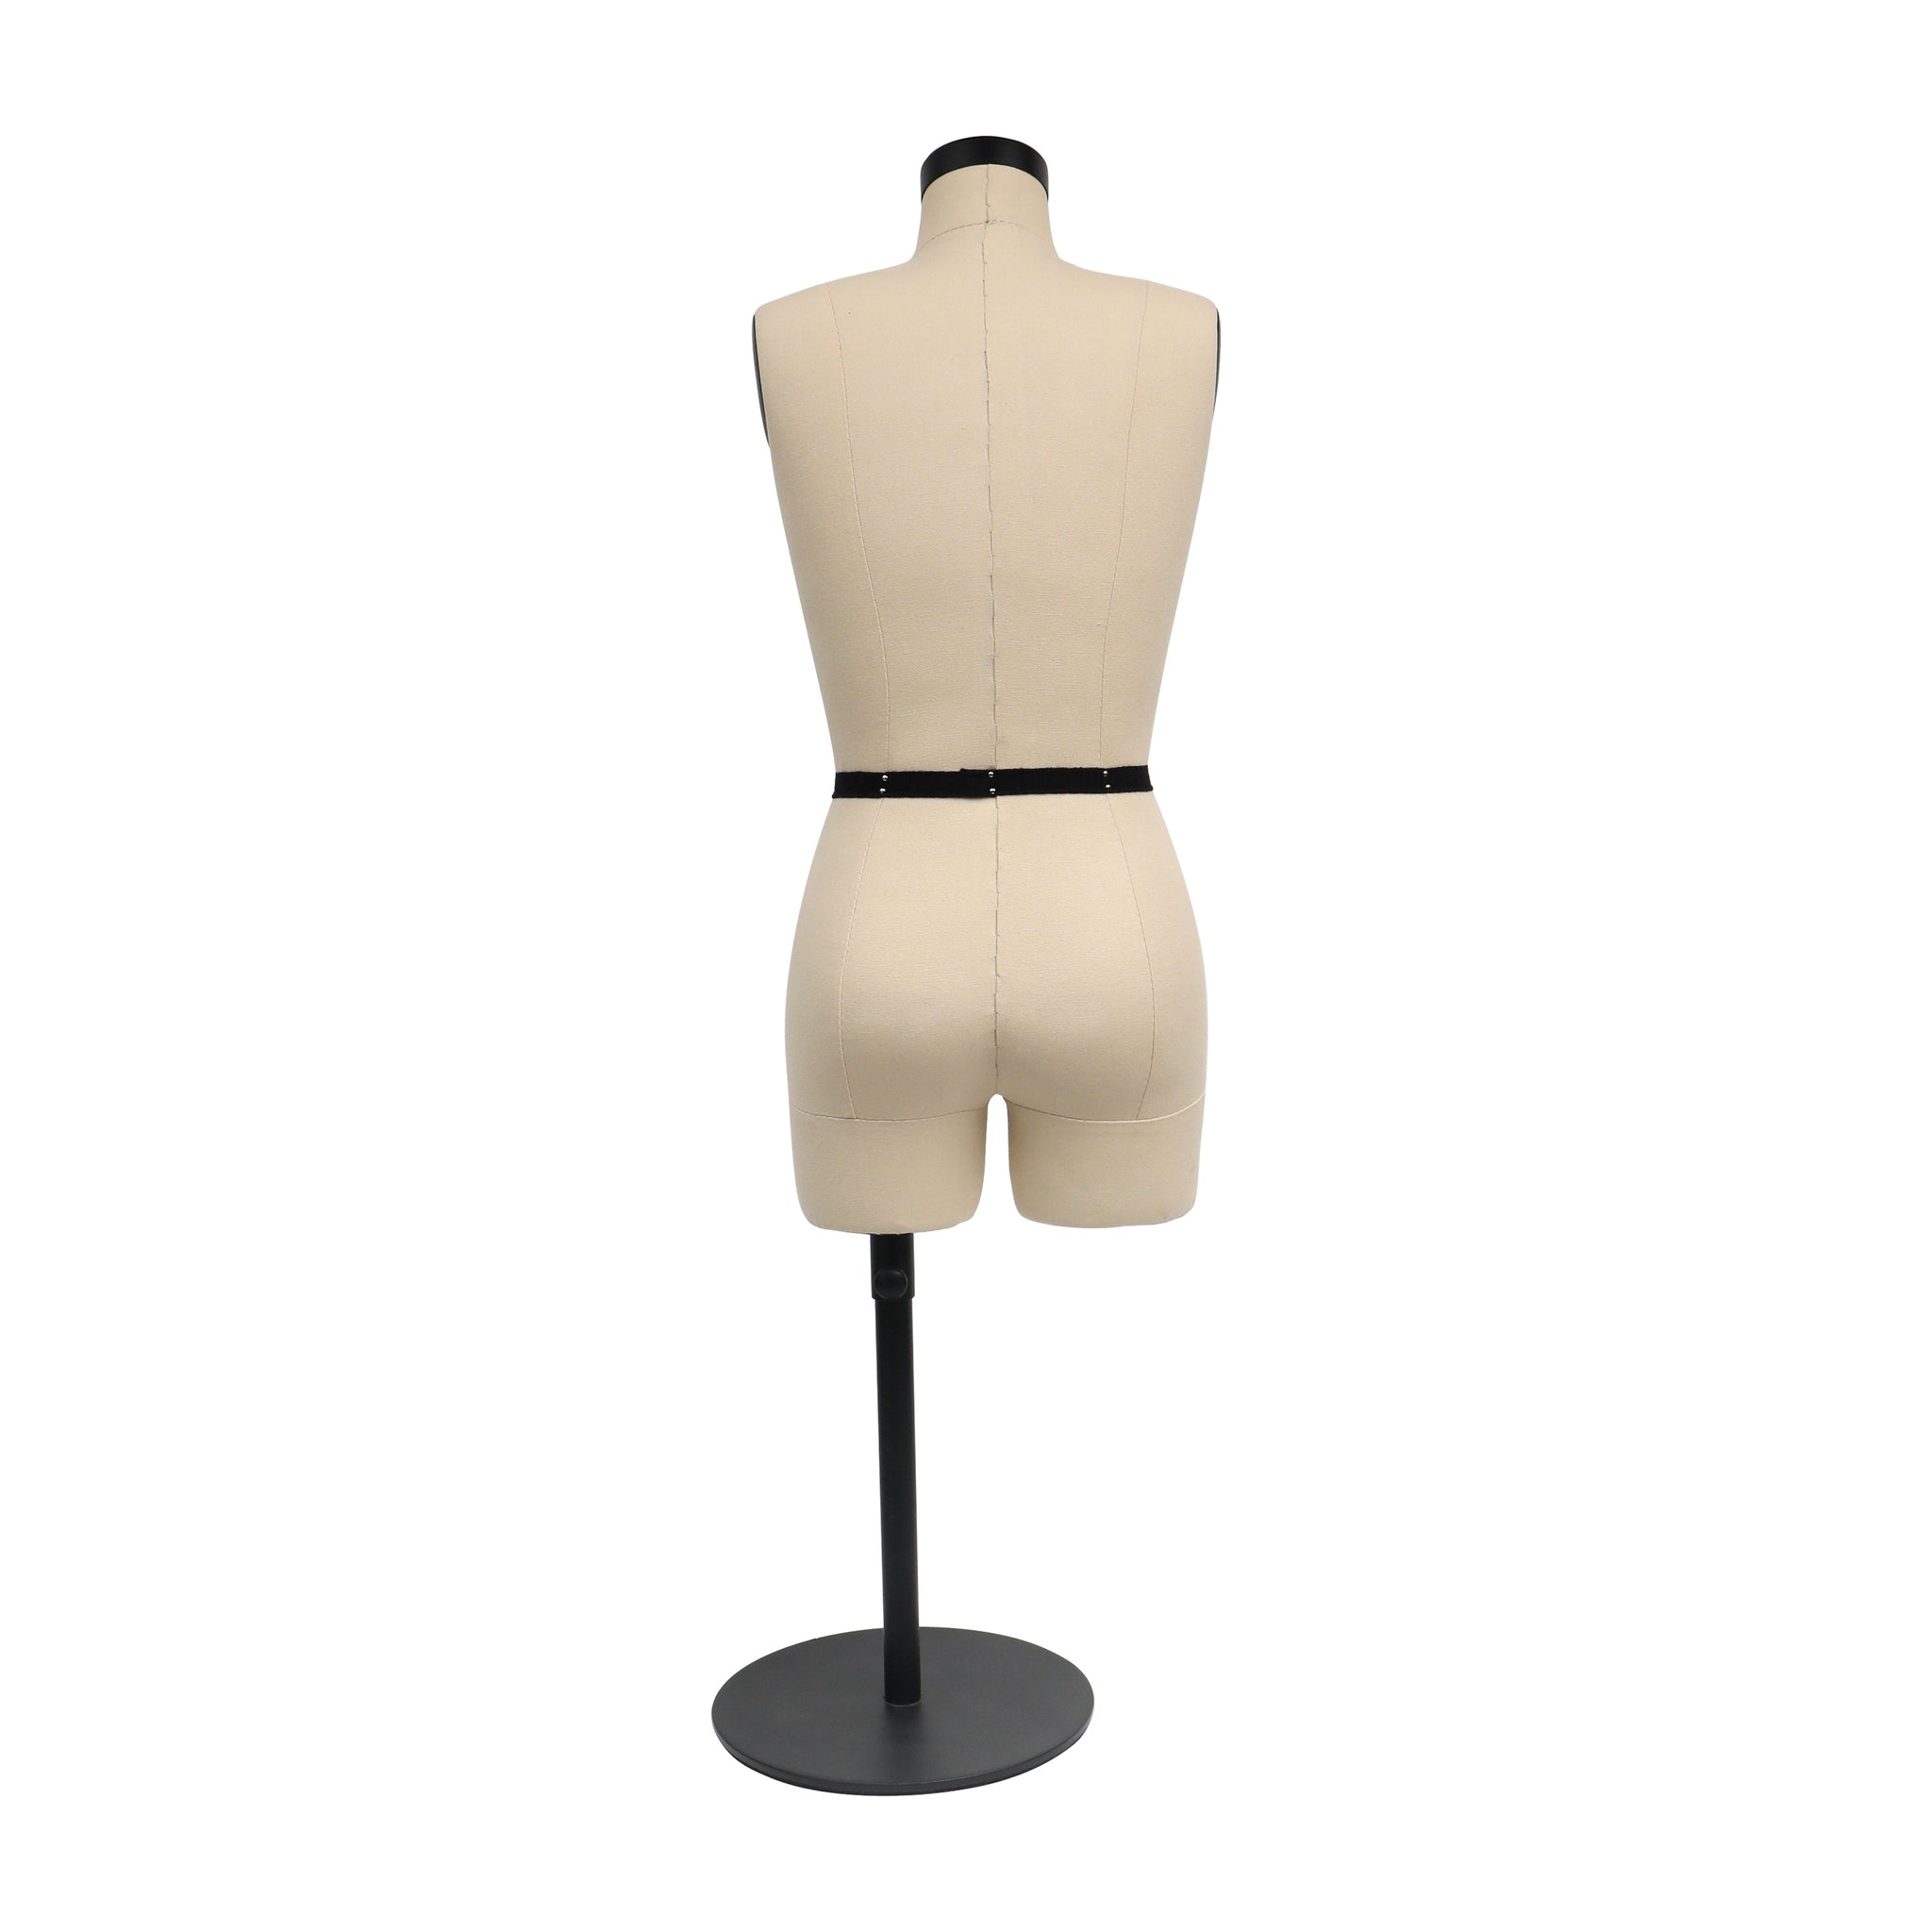 The search for perfectly fitted clothing begins here: My dressmaker's  mannequin – The G. G. Files